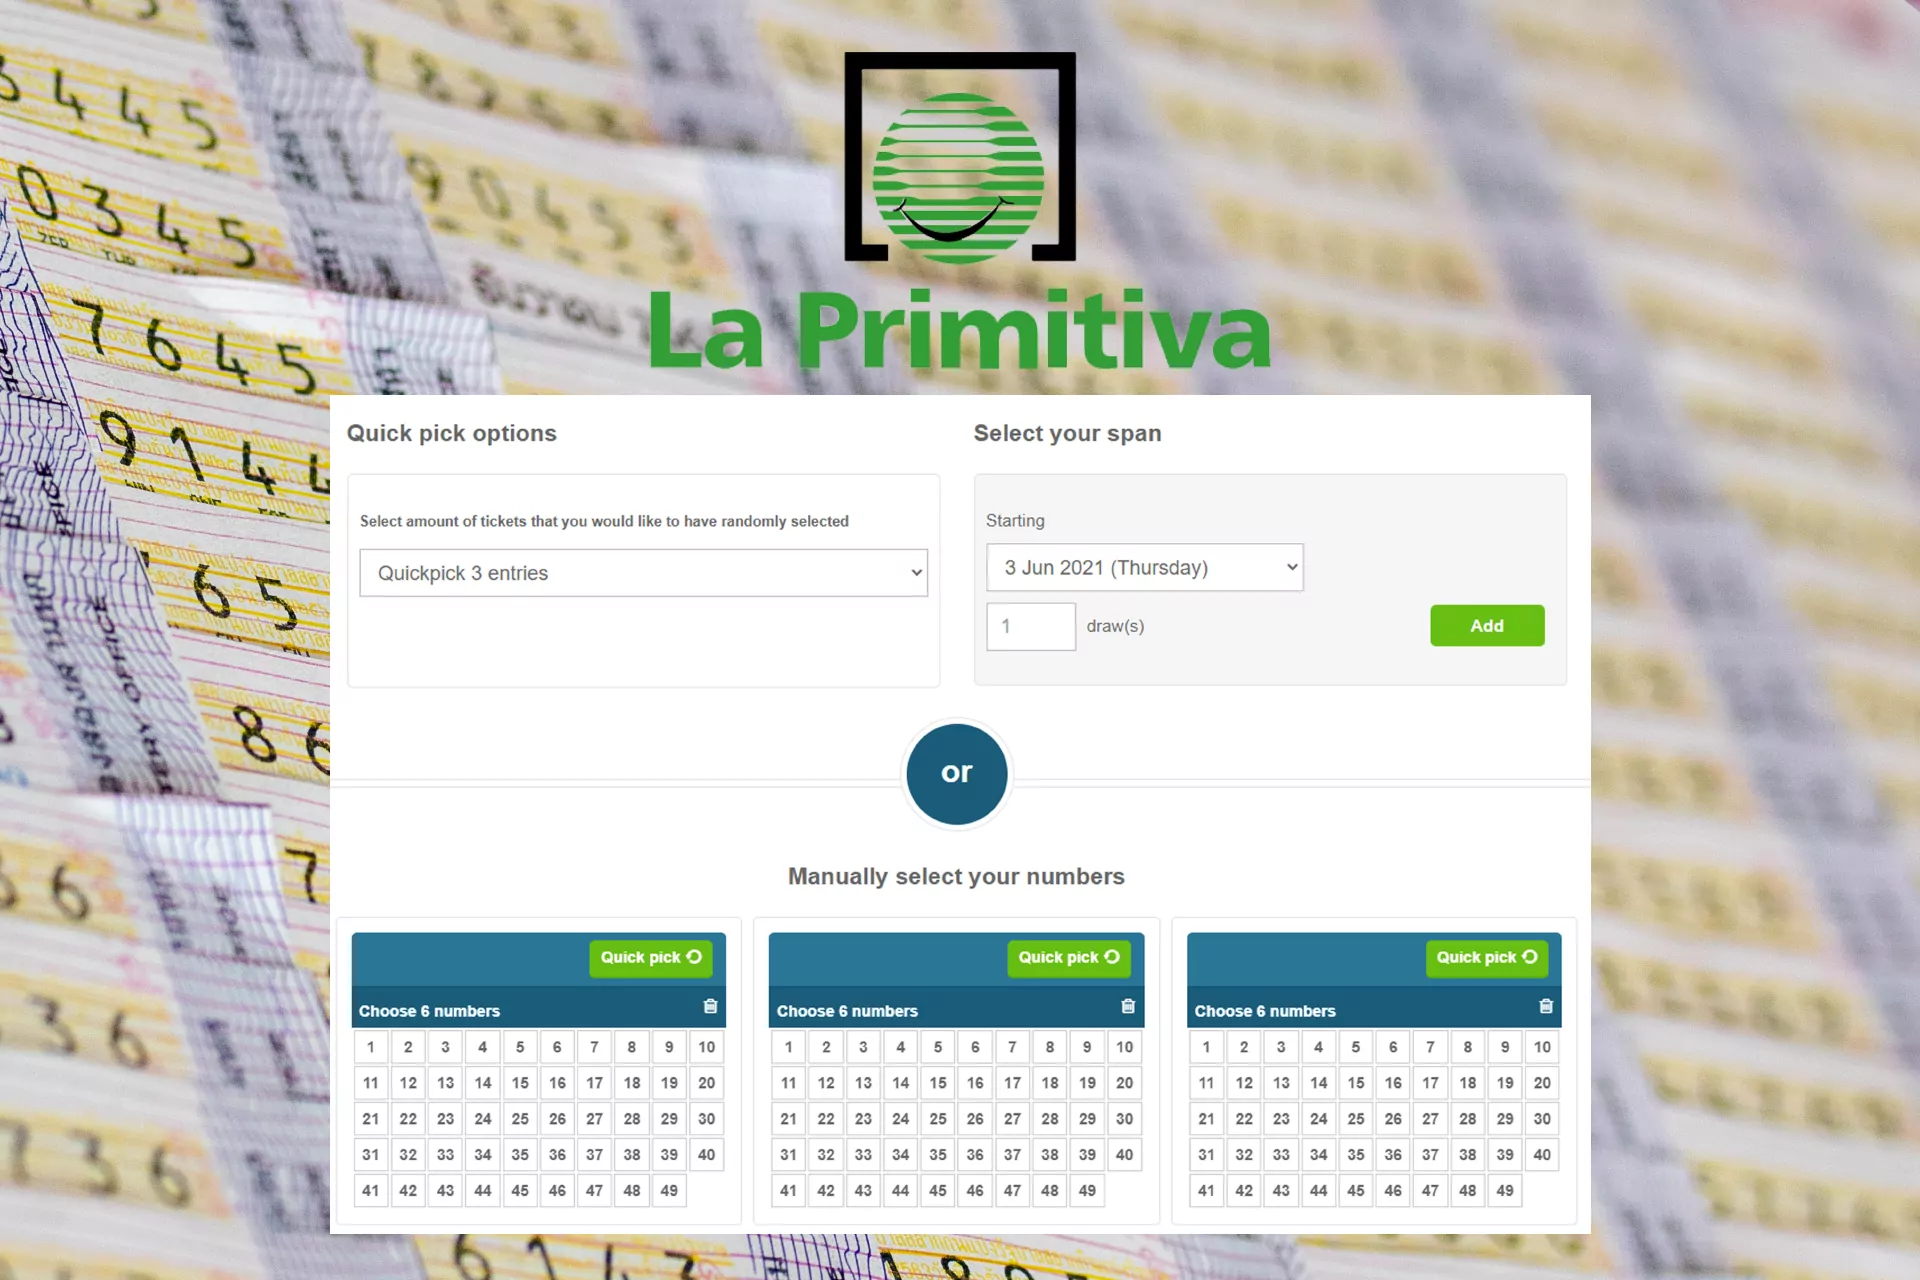 According to La Primitiva rules, players need to select 6 of 49 numbers.